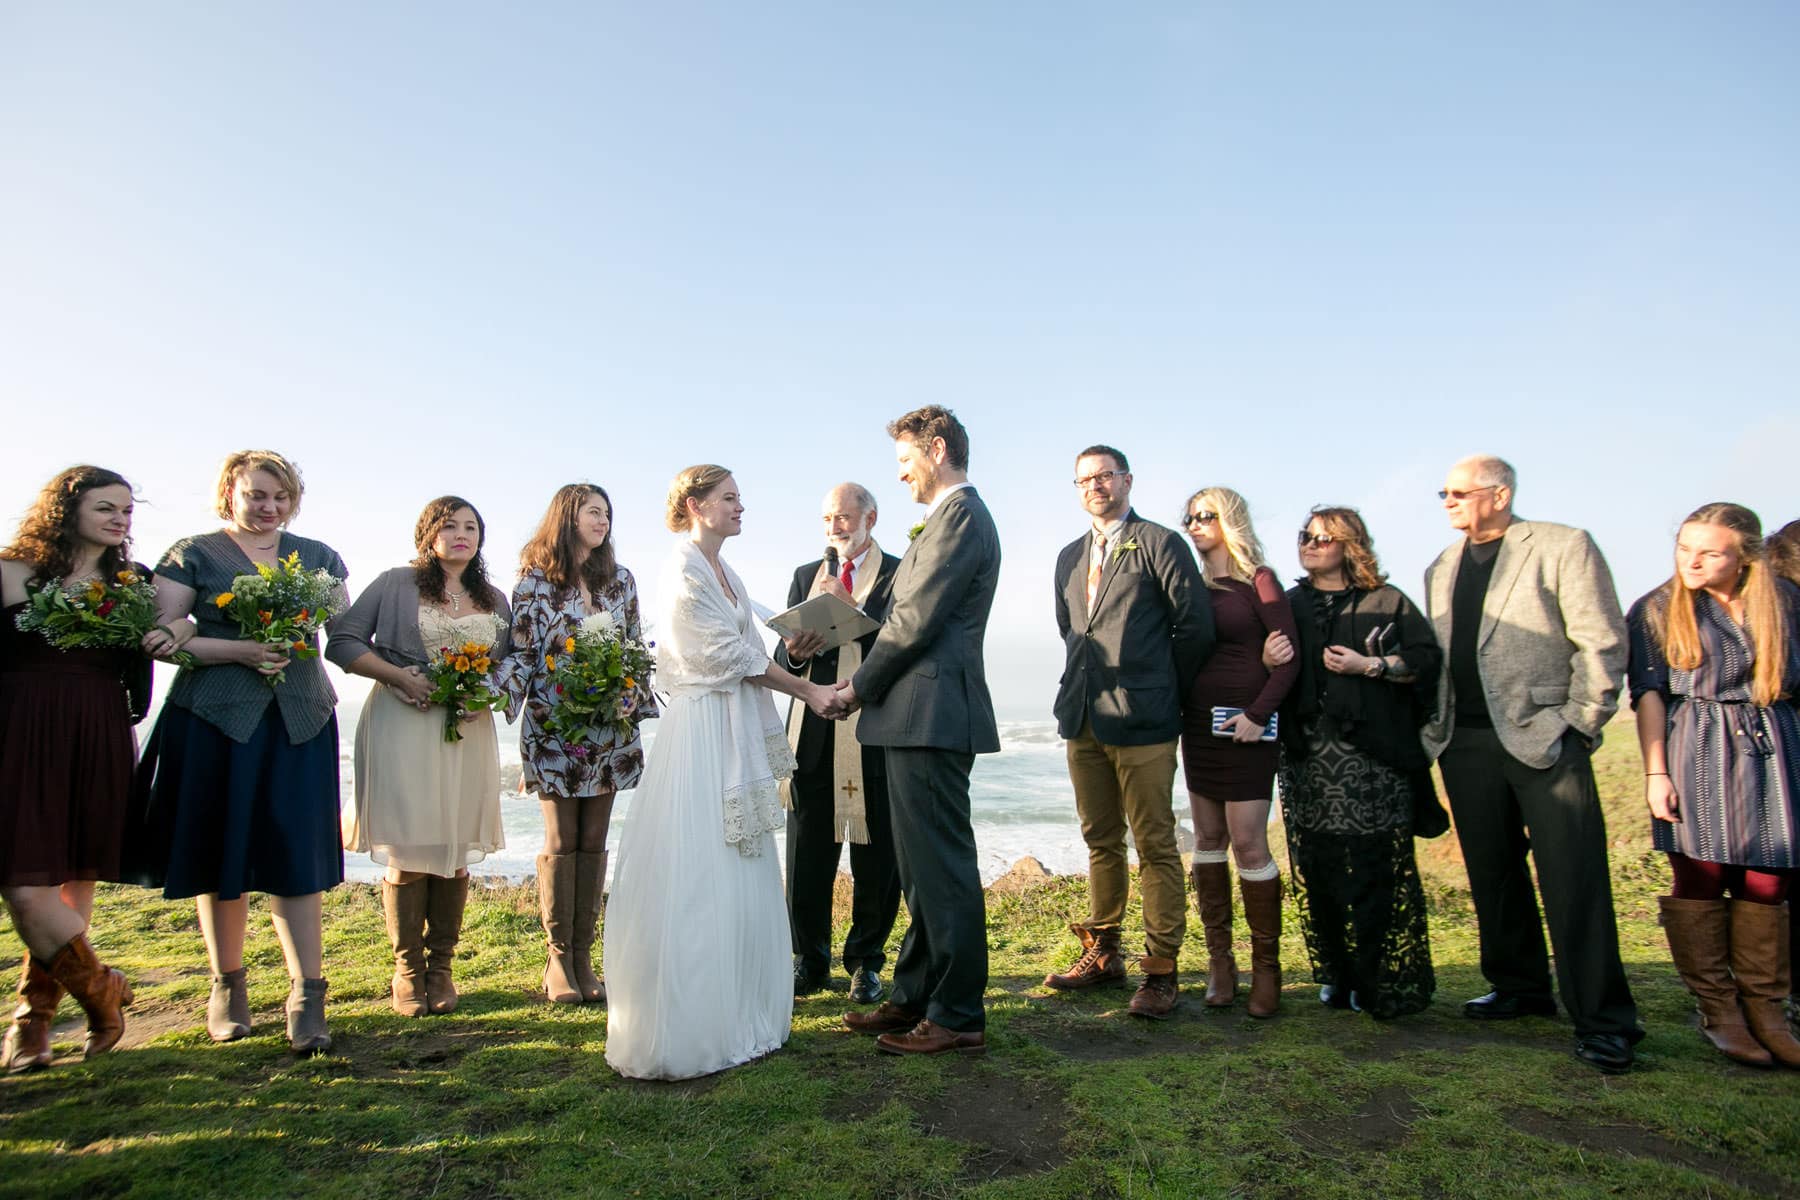 Bride and Groom surrounded by friends and family during ceremony outside